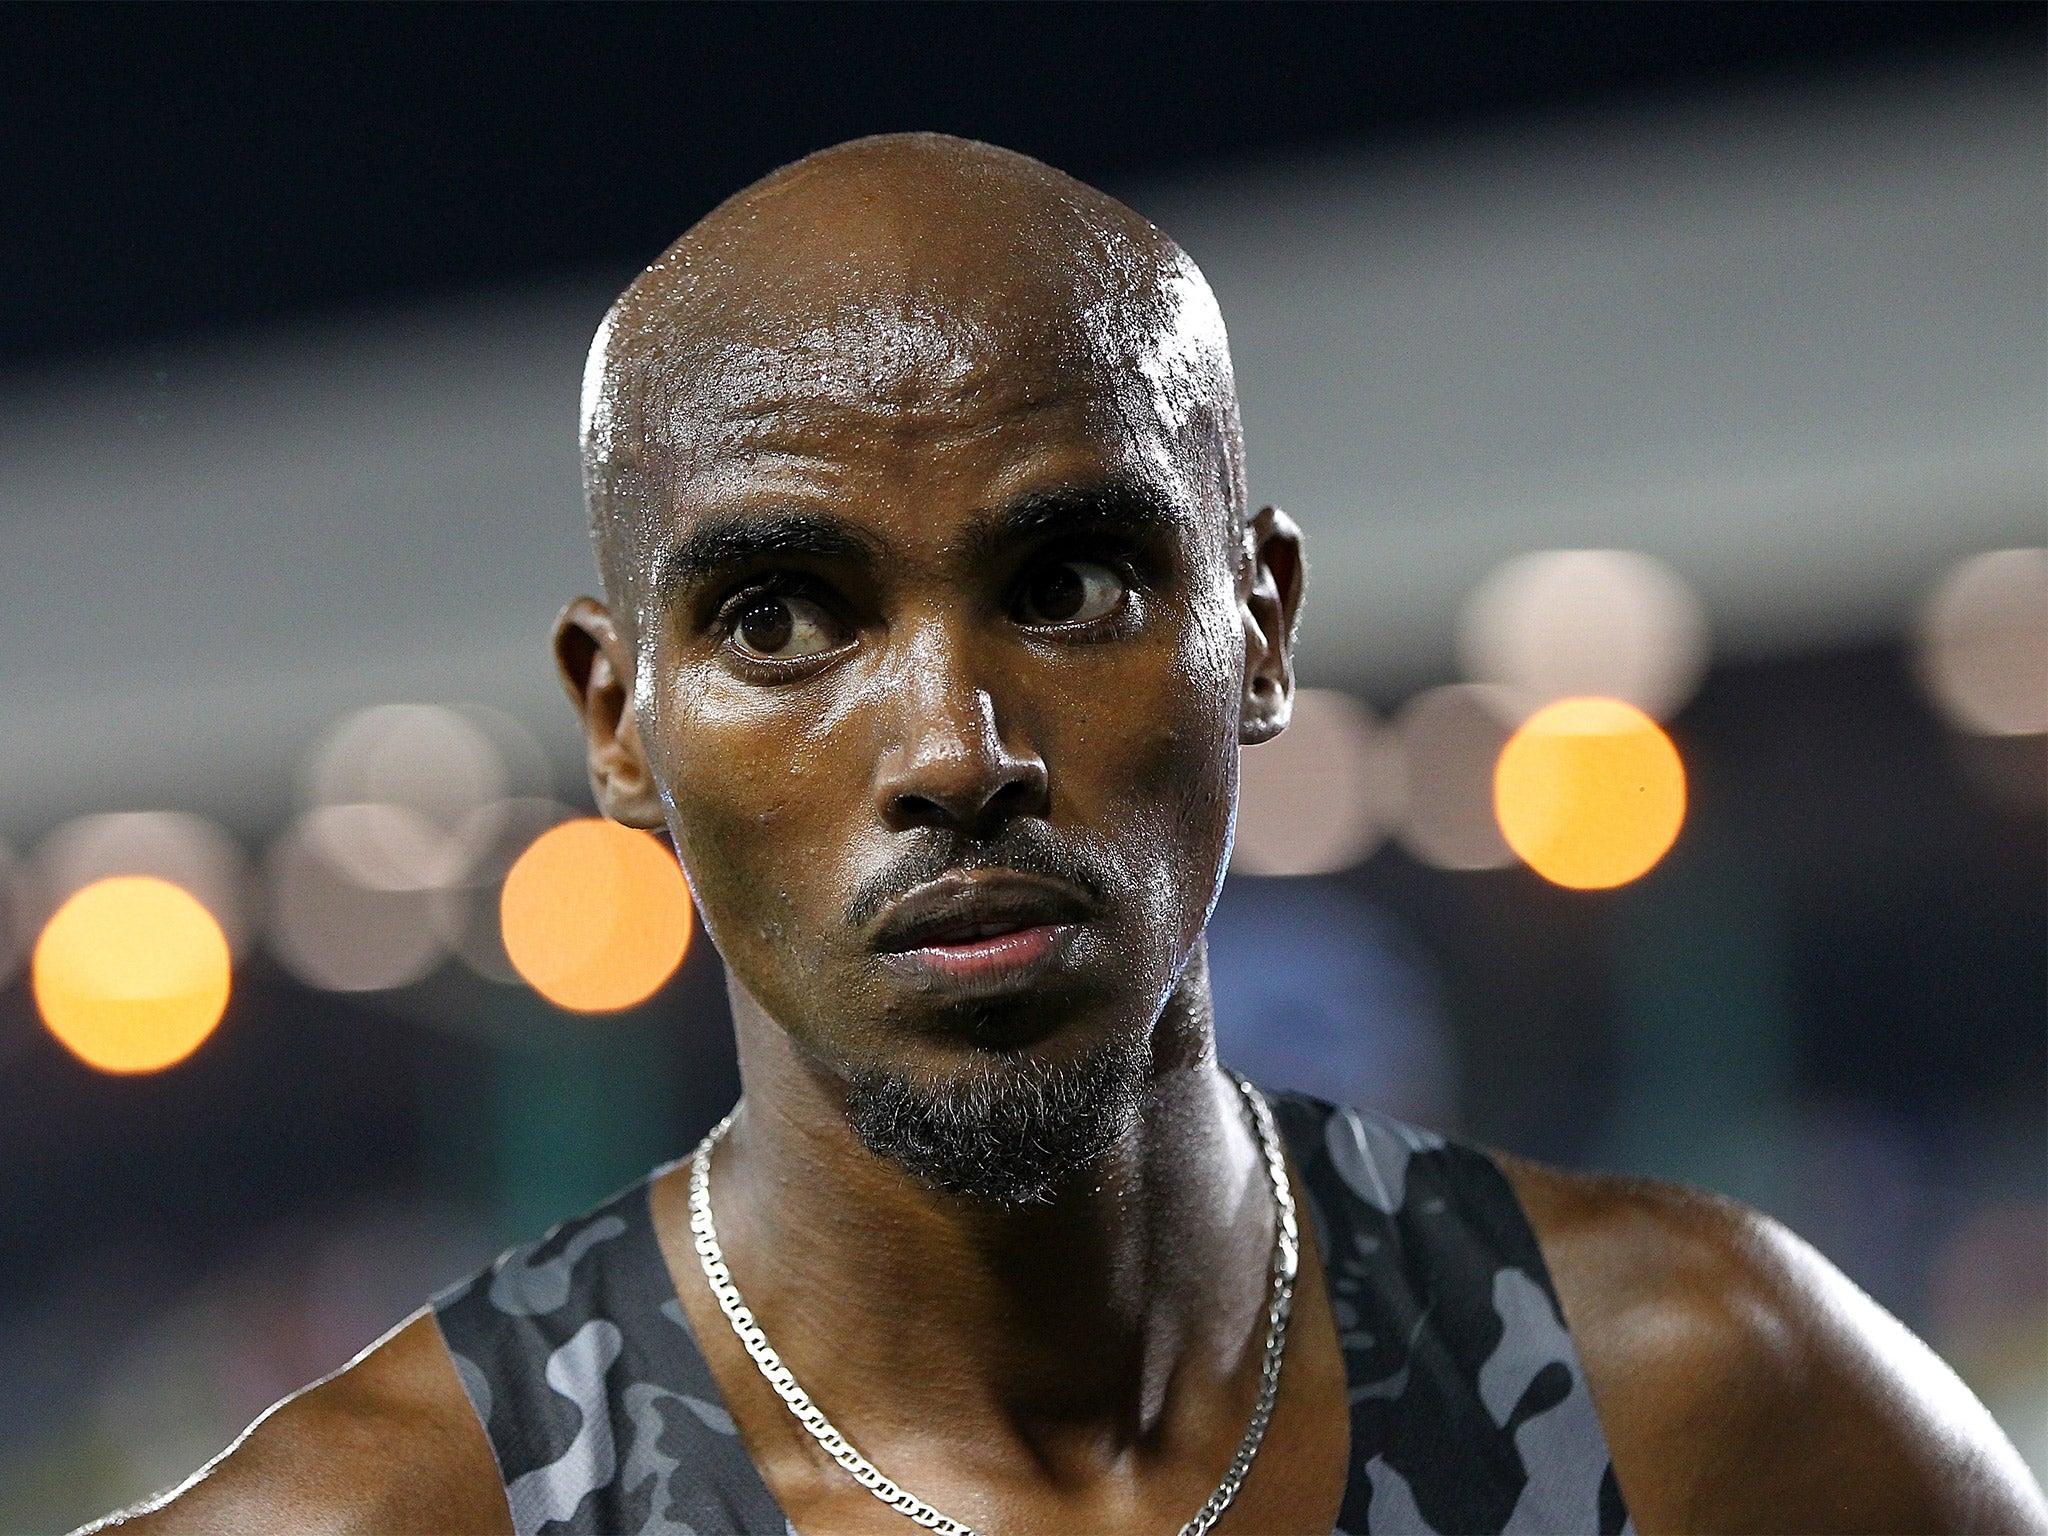 Mo Farah will face opponents more than capable of causing him an upset in Lausanne